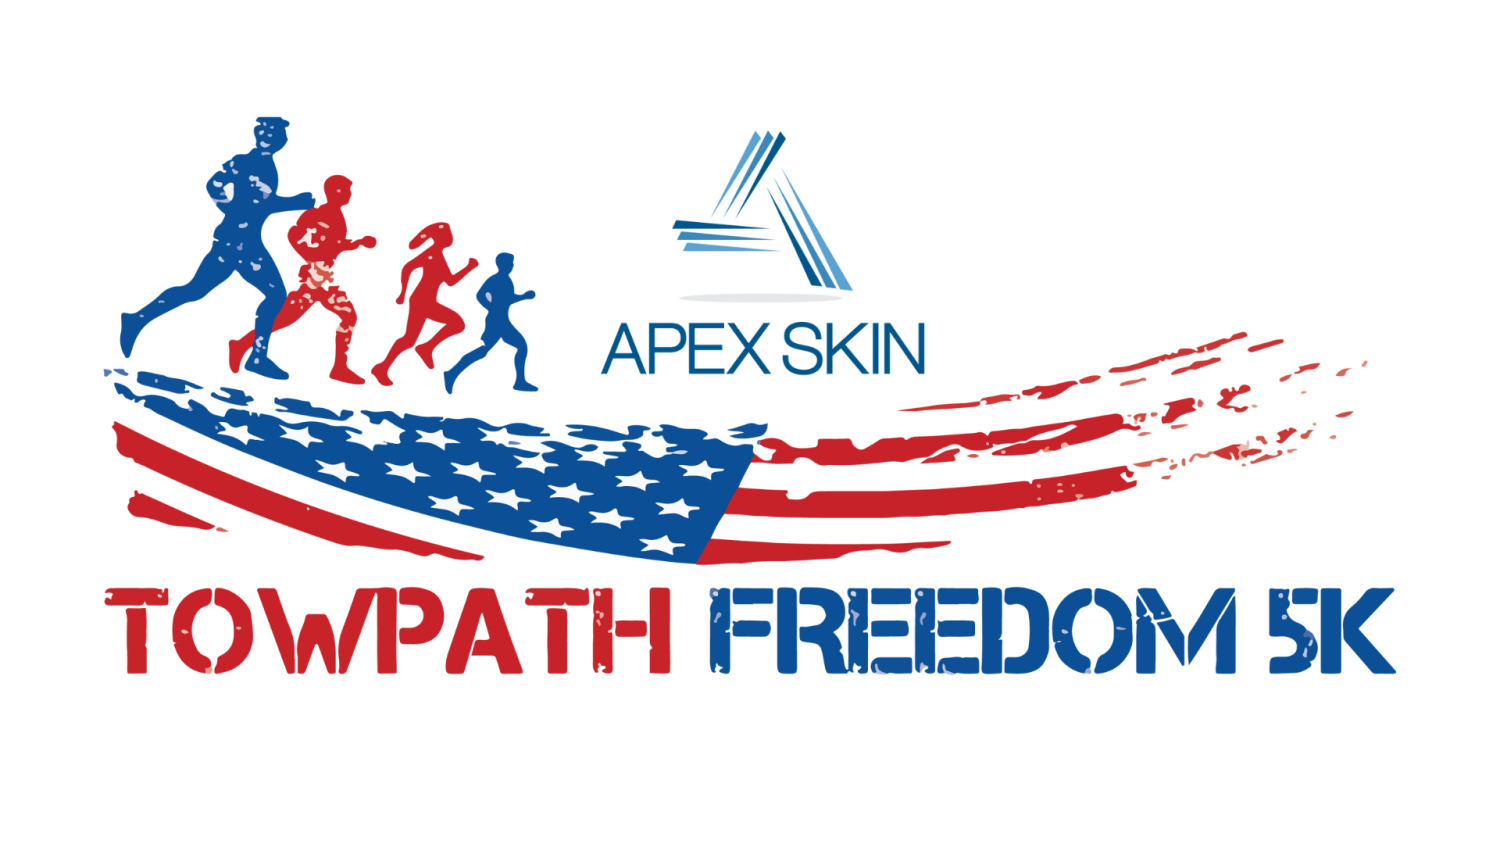 APEX Dermatology Freedom 5k logo in red and blue 